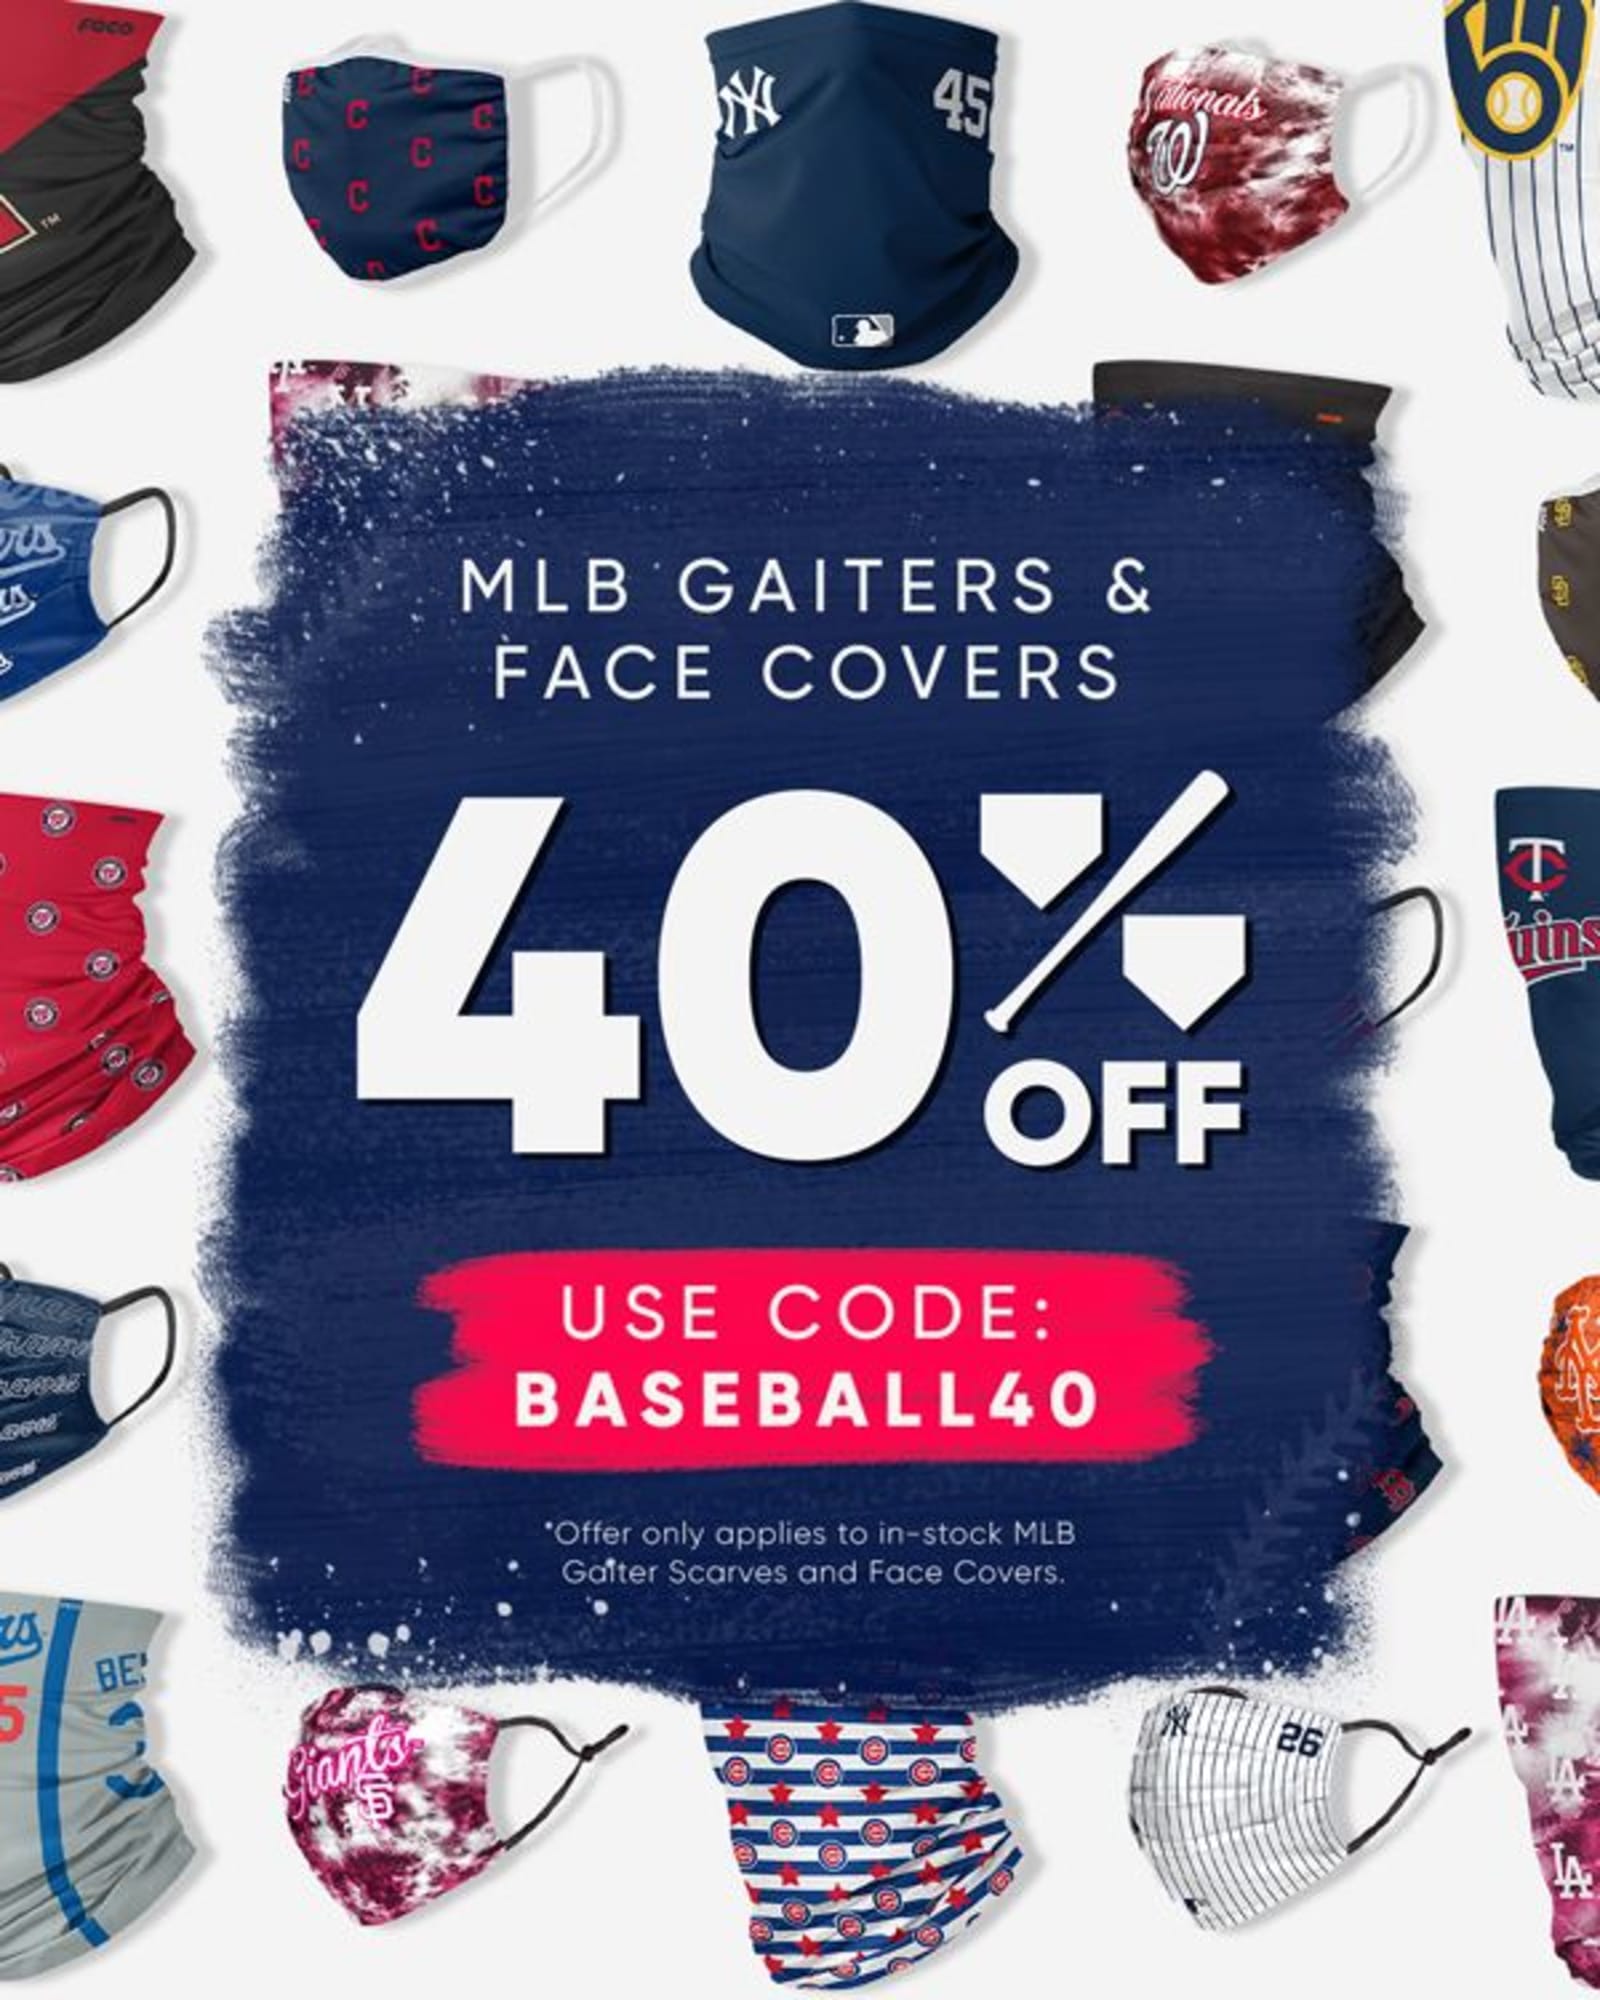 Save 40% on St. Louis Cardinals face coverings at FOCO